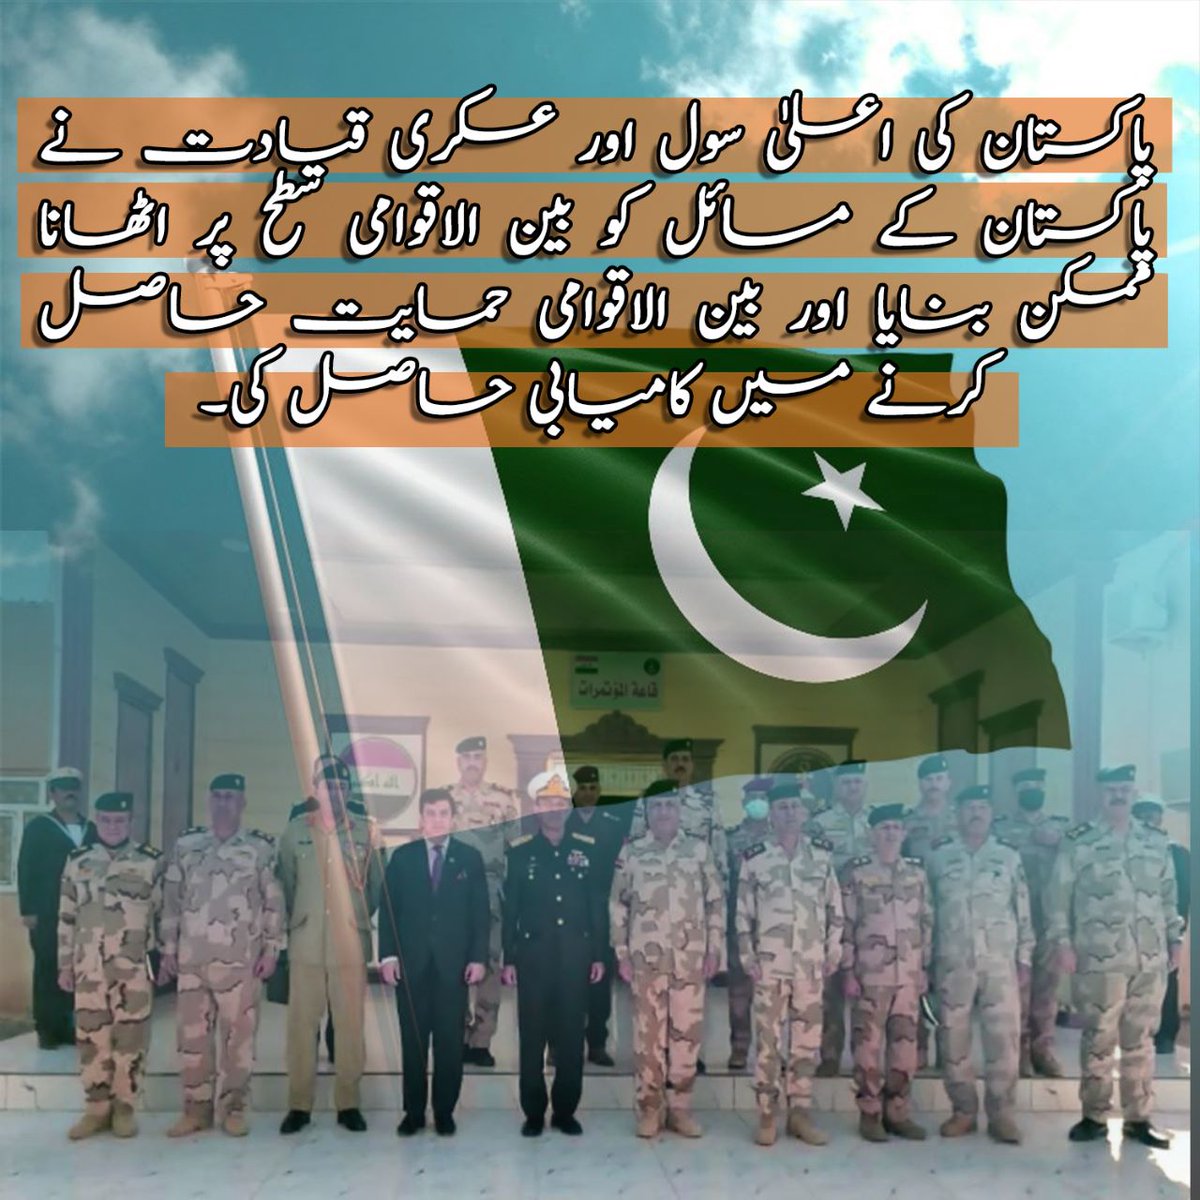 #ResilientPakistan The resilience of Pakistan's people is a testament to their courage and their unbreakable bond as a nation.